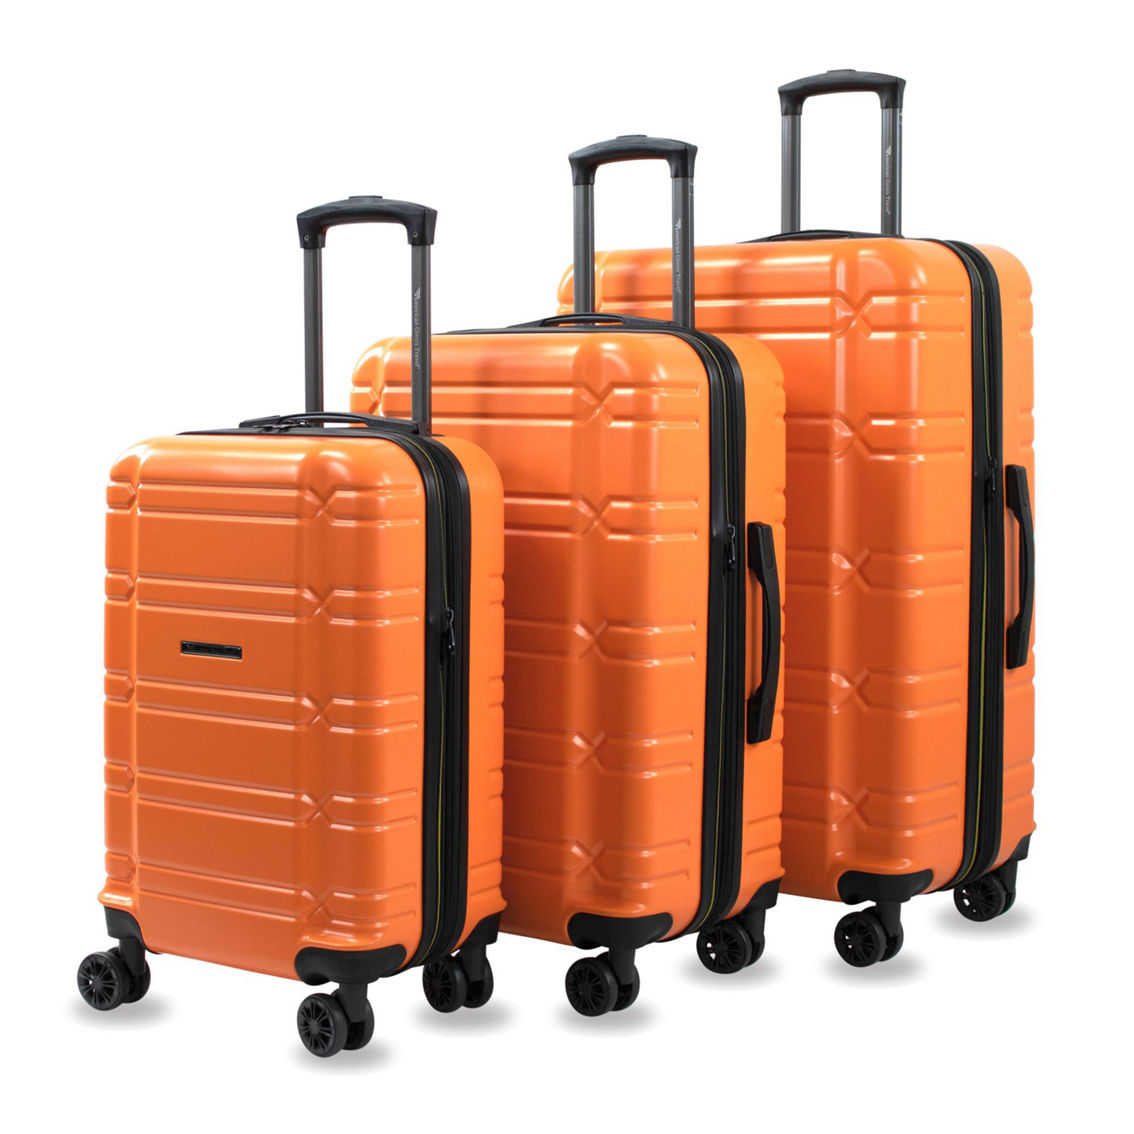 American Green Travel  Allegro Expandable 3Piece Luggage Set - Image 1 of 5